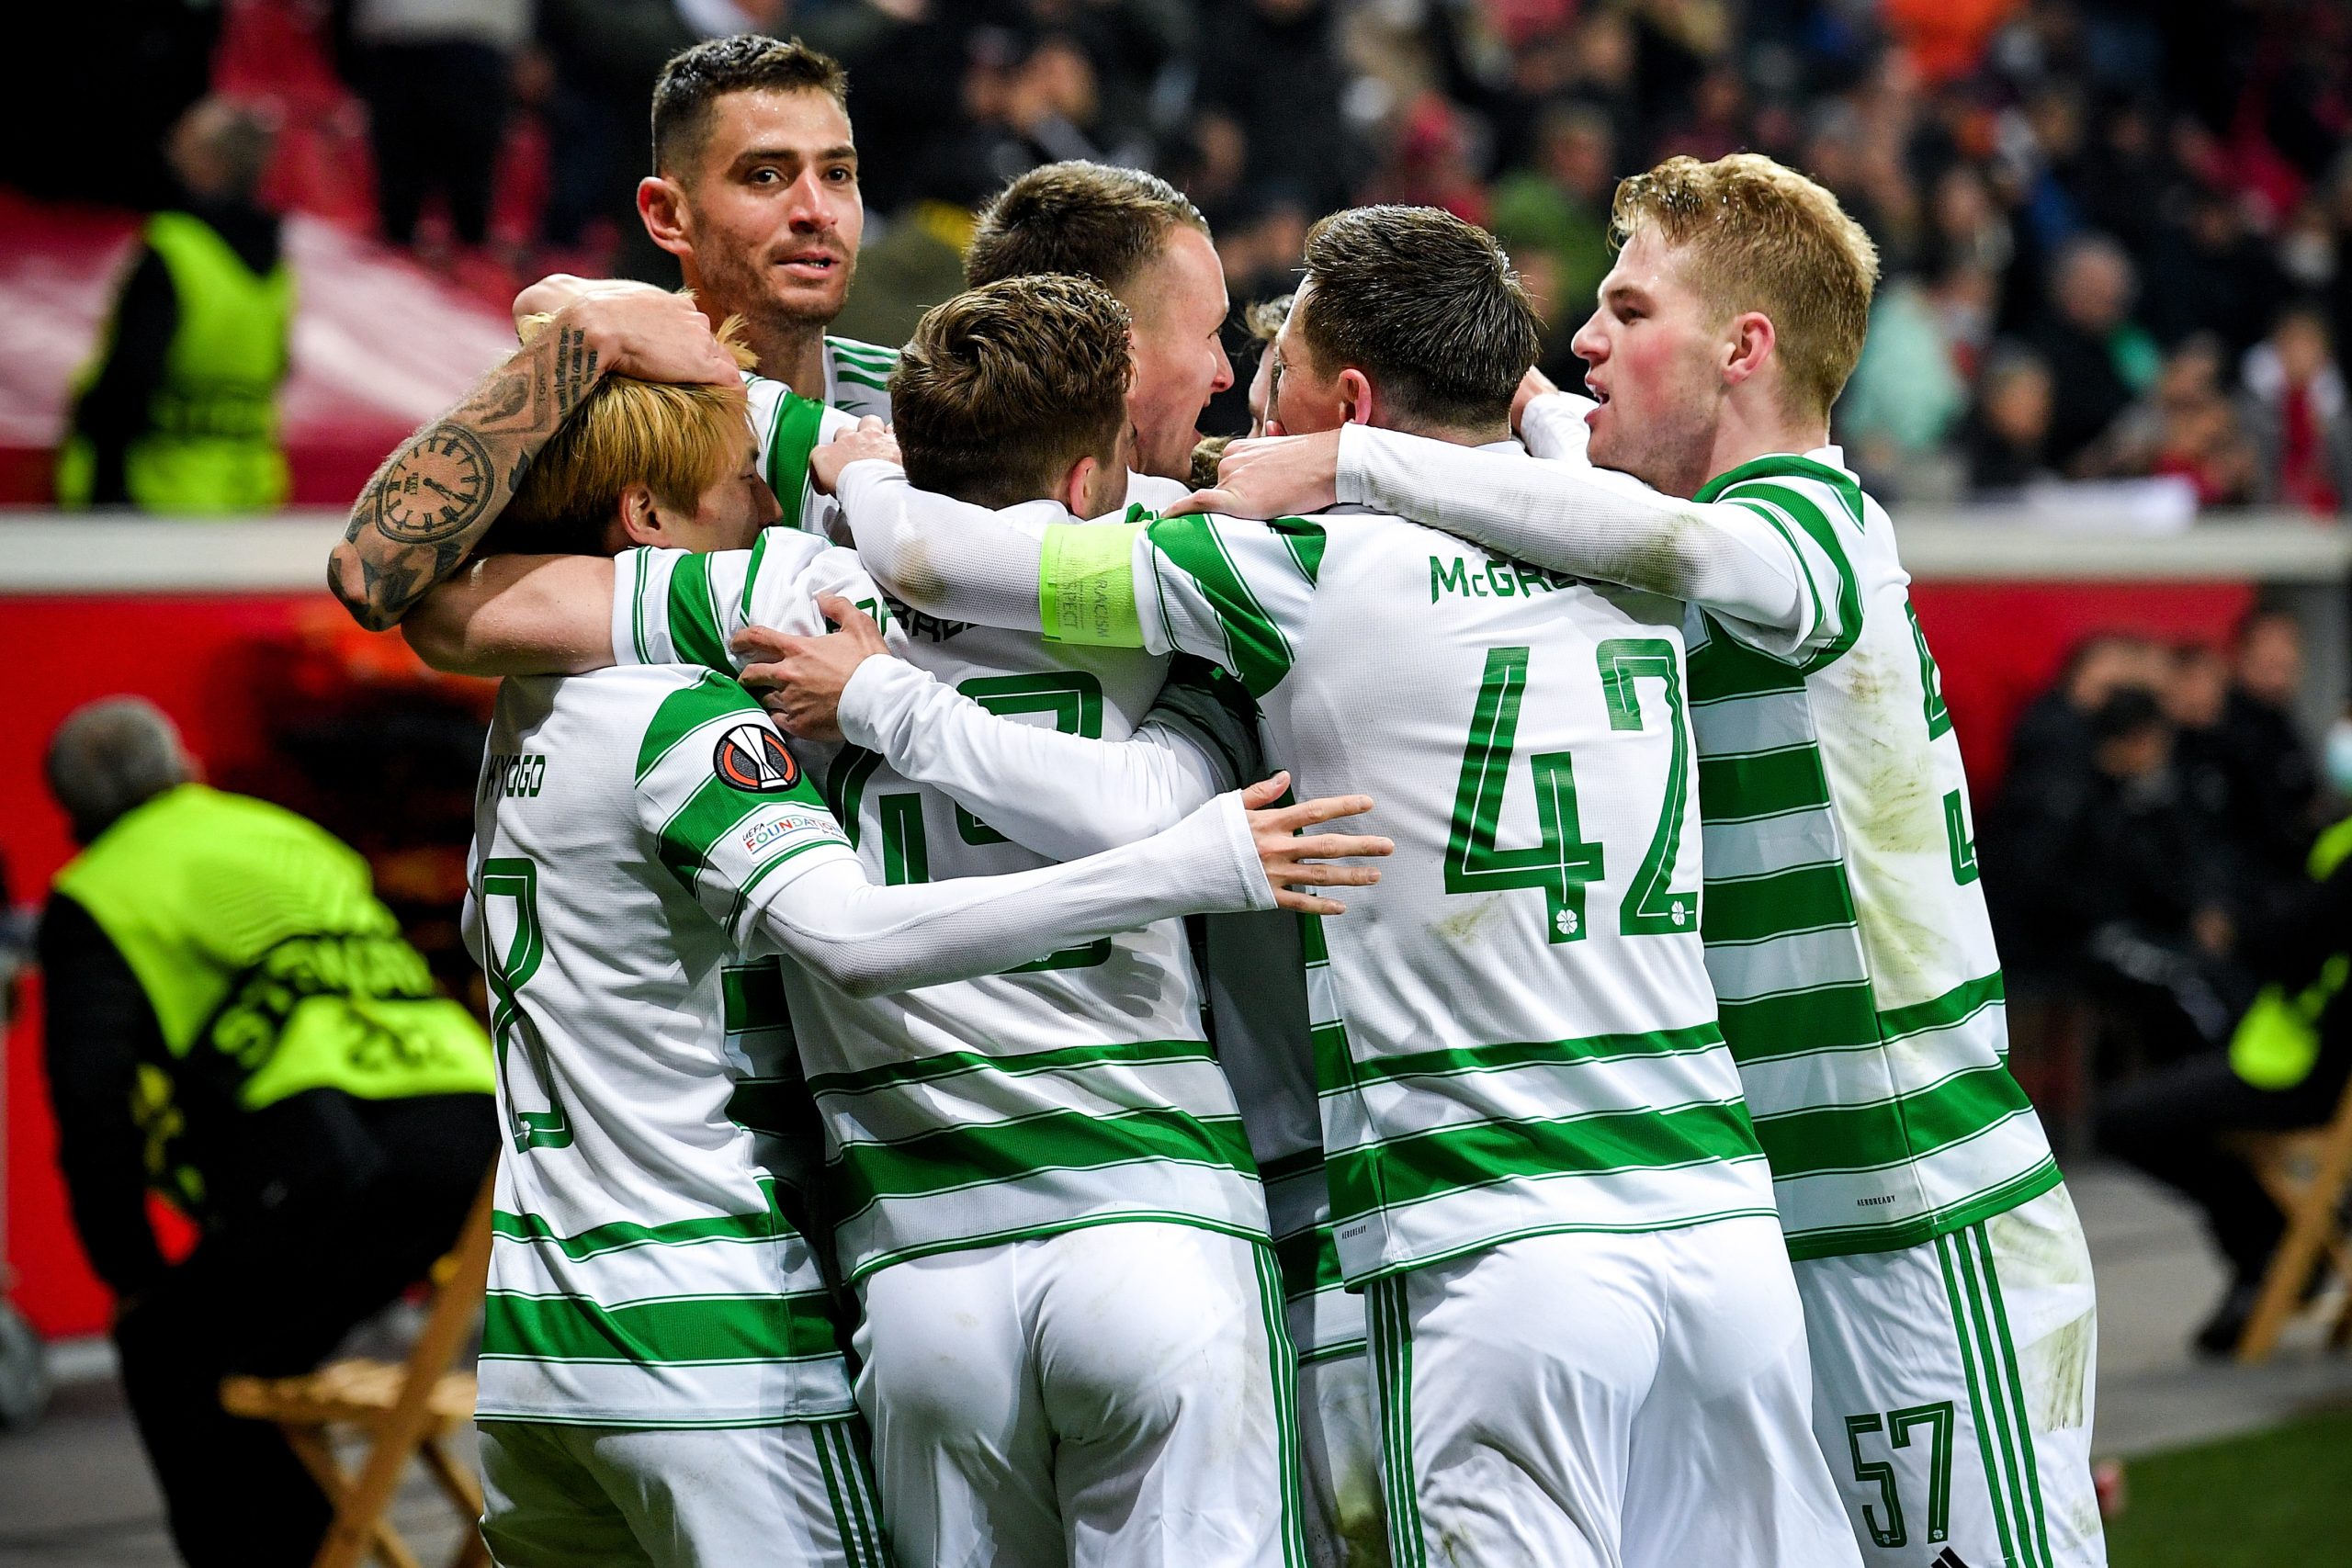 epa09603240 Celtic players celebrate their 2-1 lead during the UEFA Europa League group G stage match between Bayer 04 Leverkusen and Celtic FC in Leverkusen, Germany, 25 November 2021.  EPA/SASCHA STEINBACH